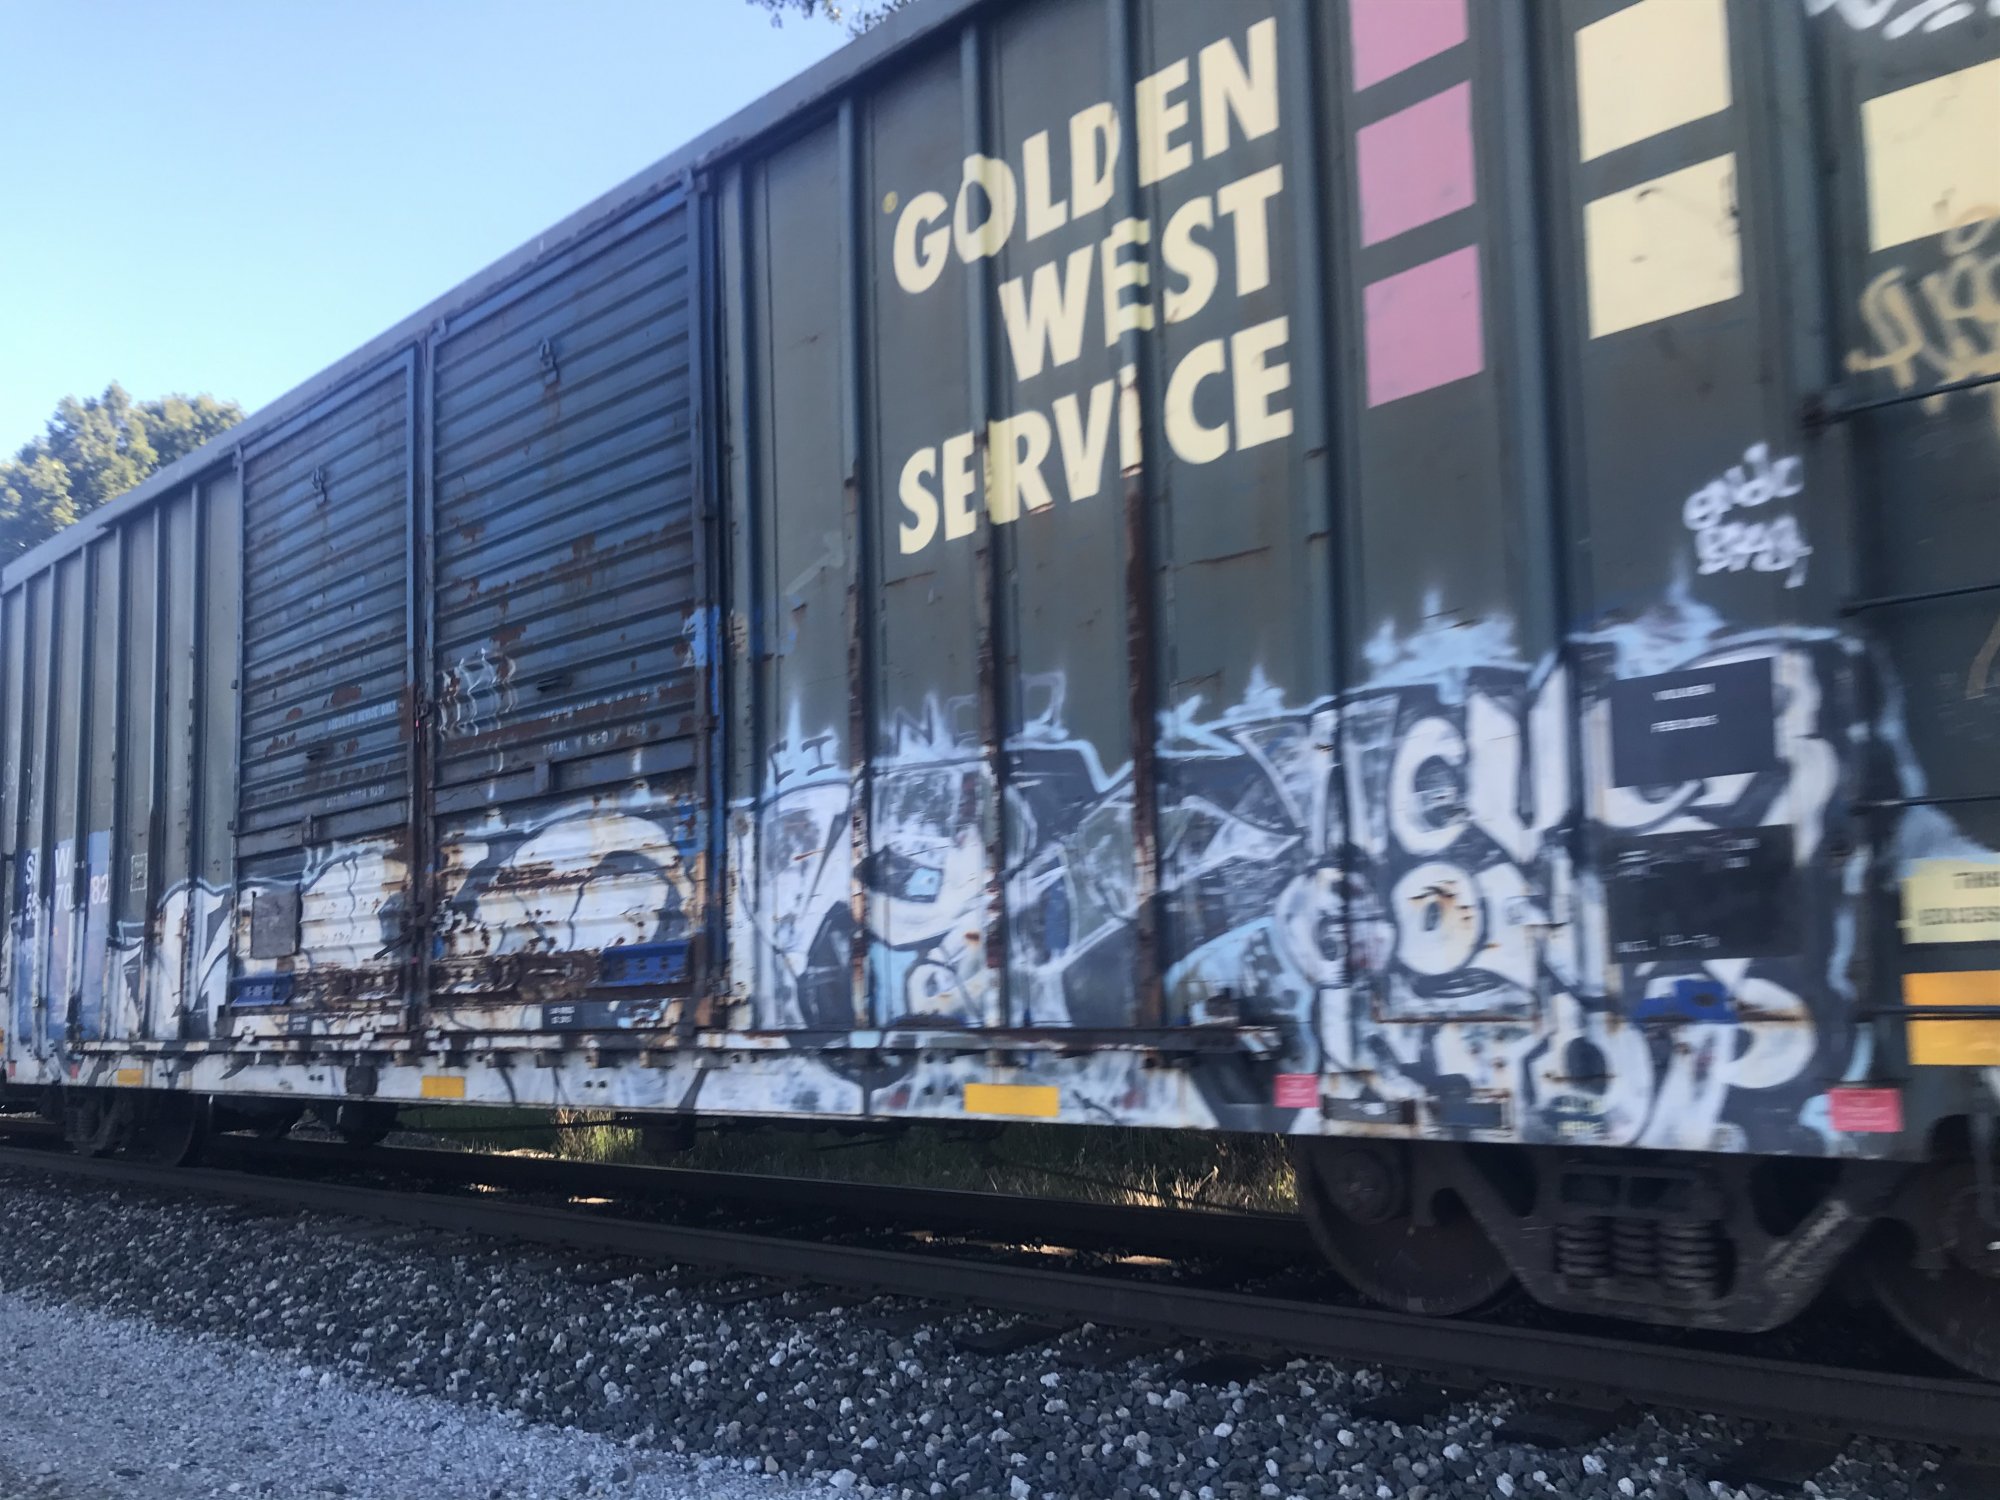 Goldenwest Service Boxcar